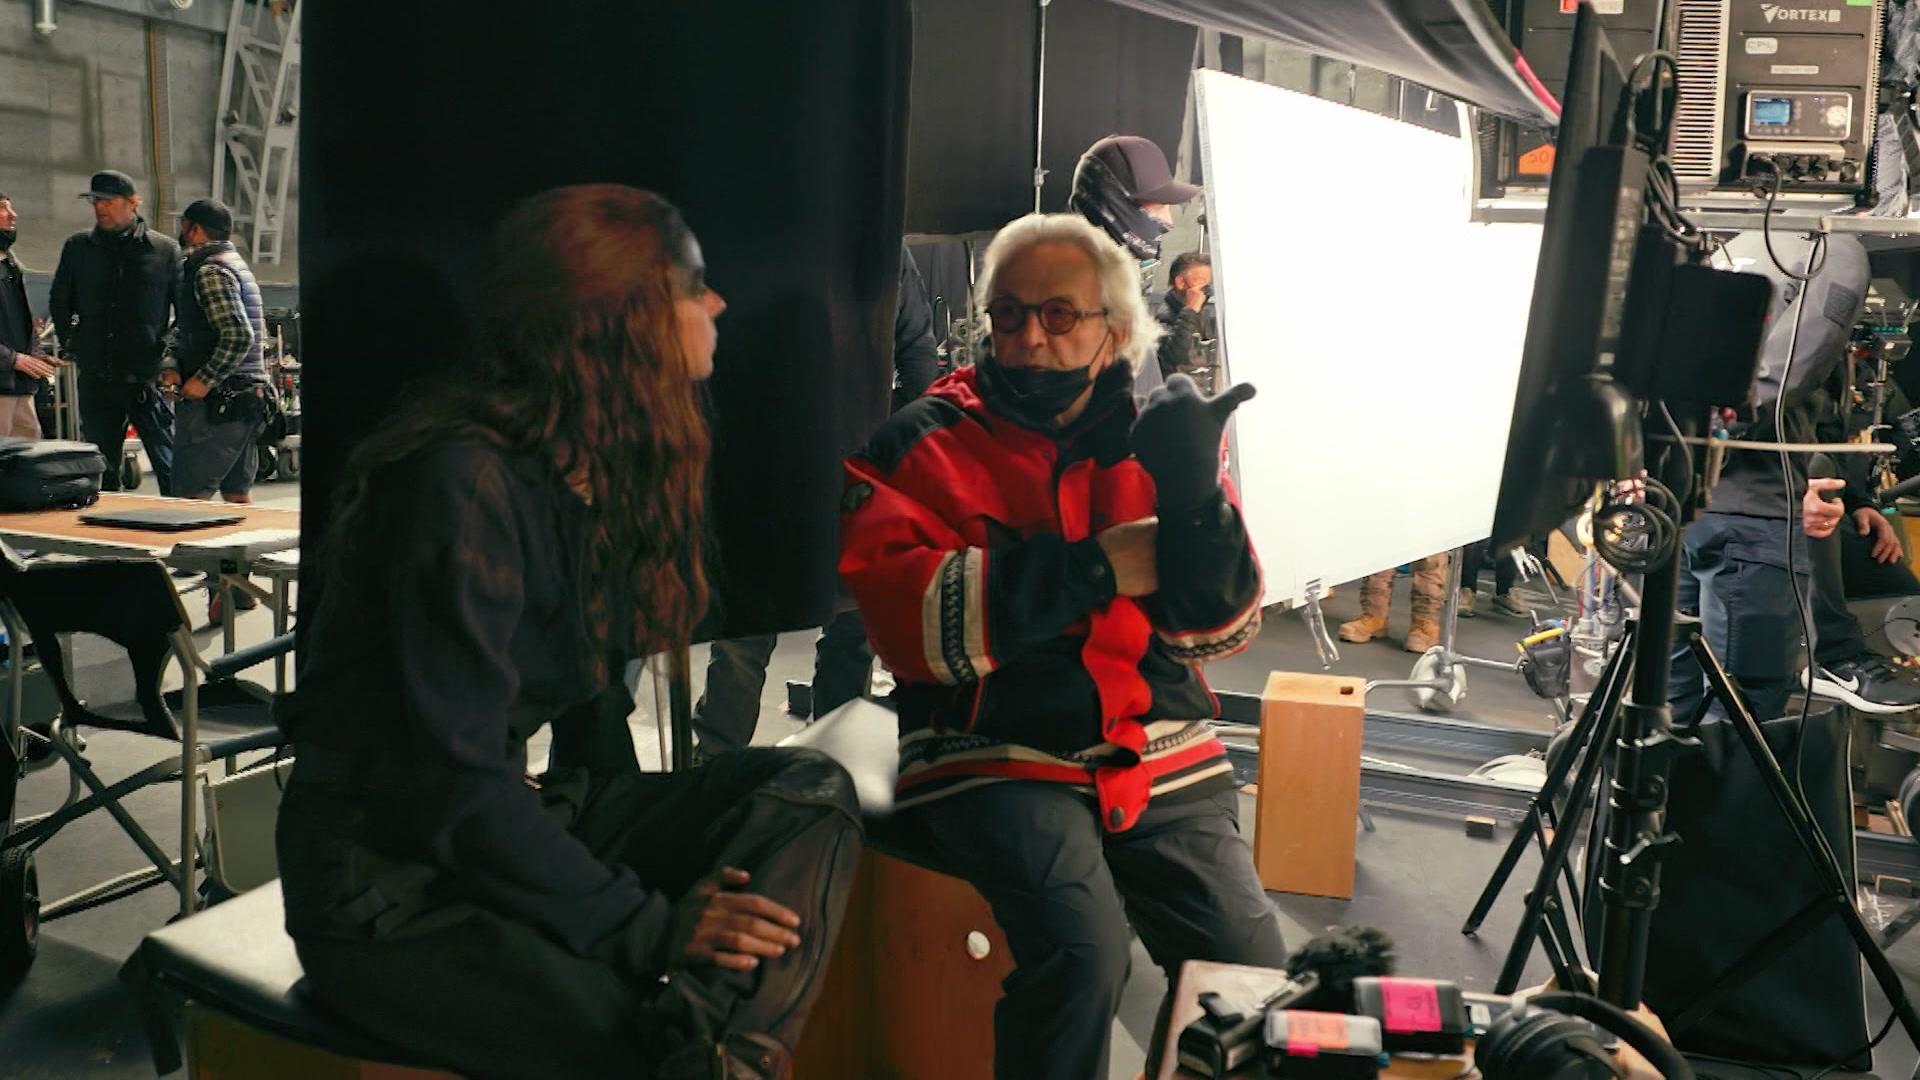 Director George Miller, dressed in a red jacket, directs actress Anya Taylor-Joy on the set of Furiosa.